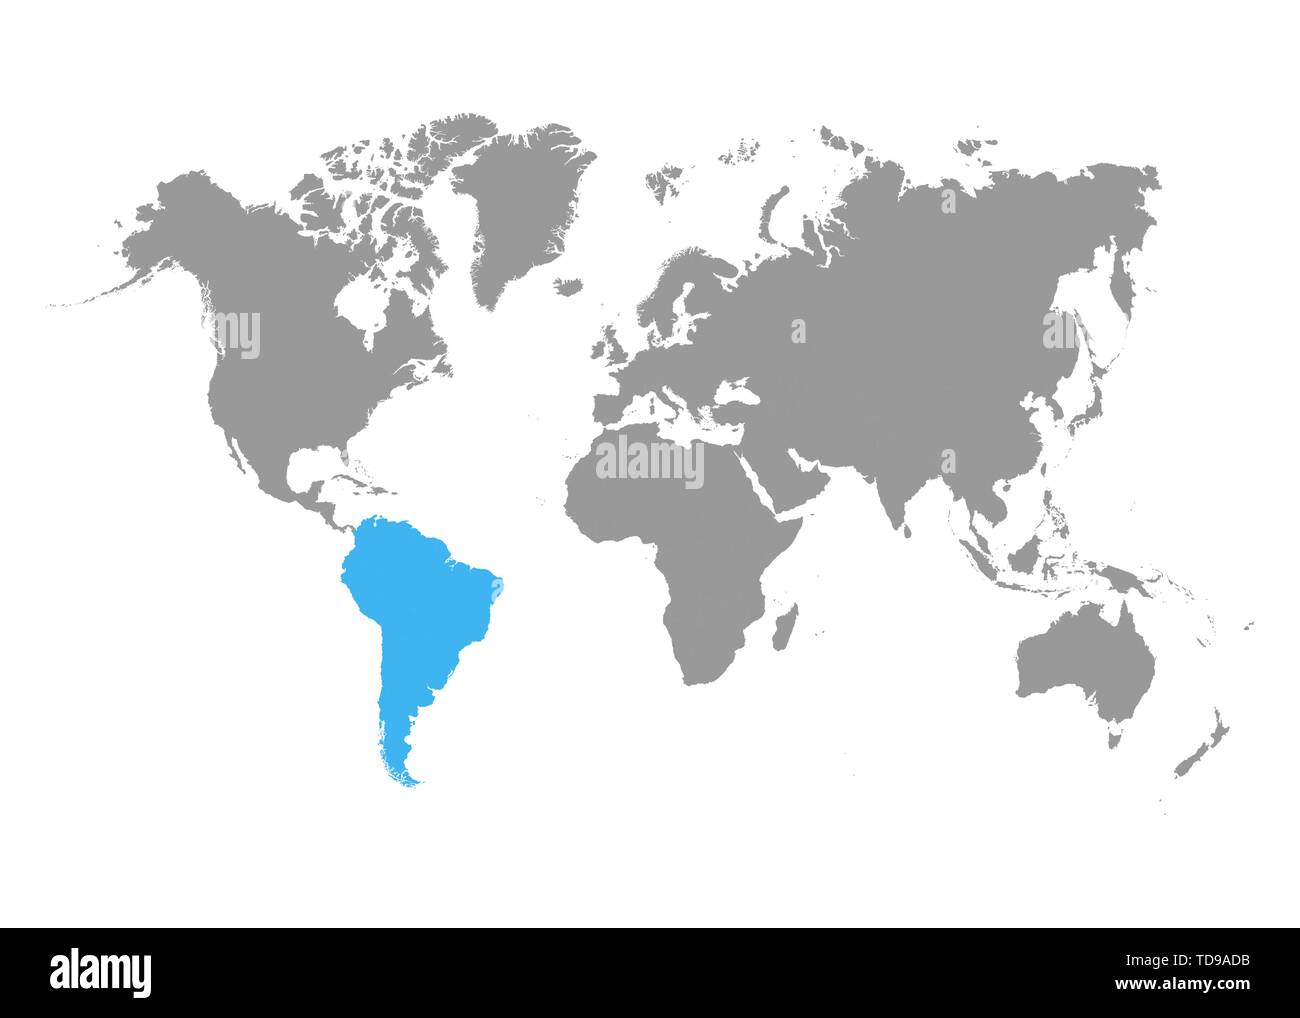 The Map Of South America Is Highlighted In Blue On The World Map